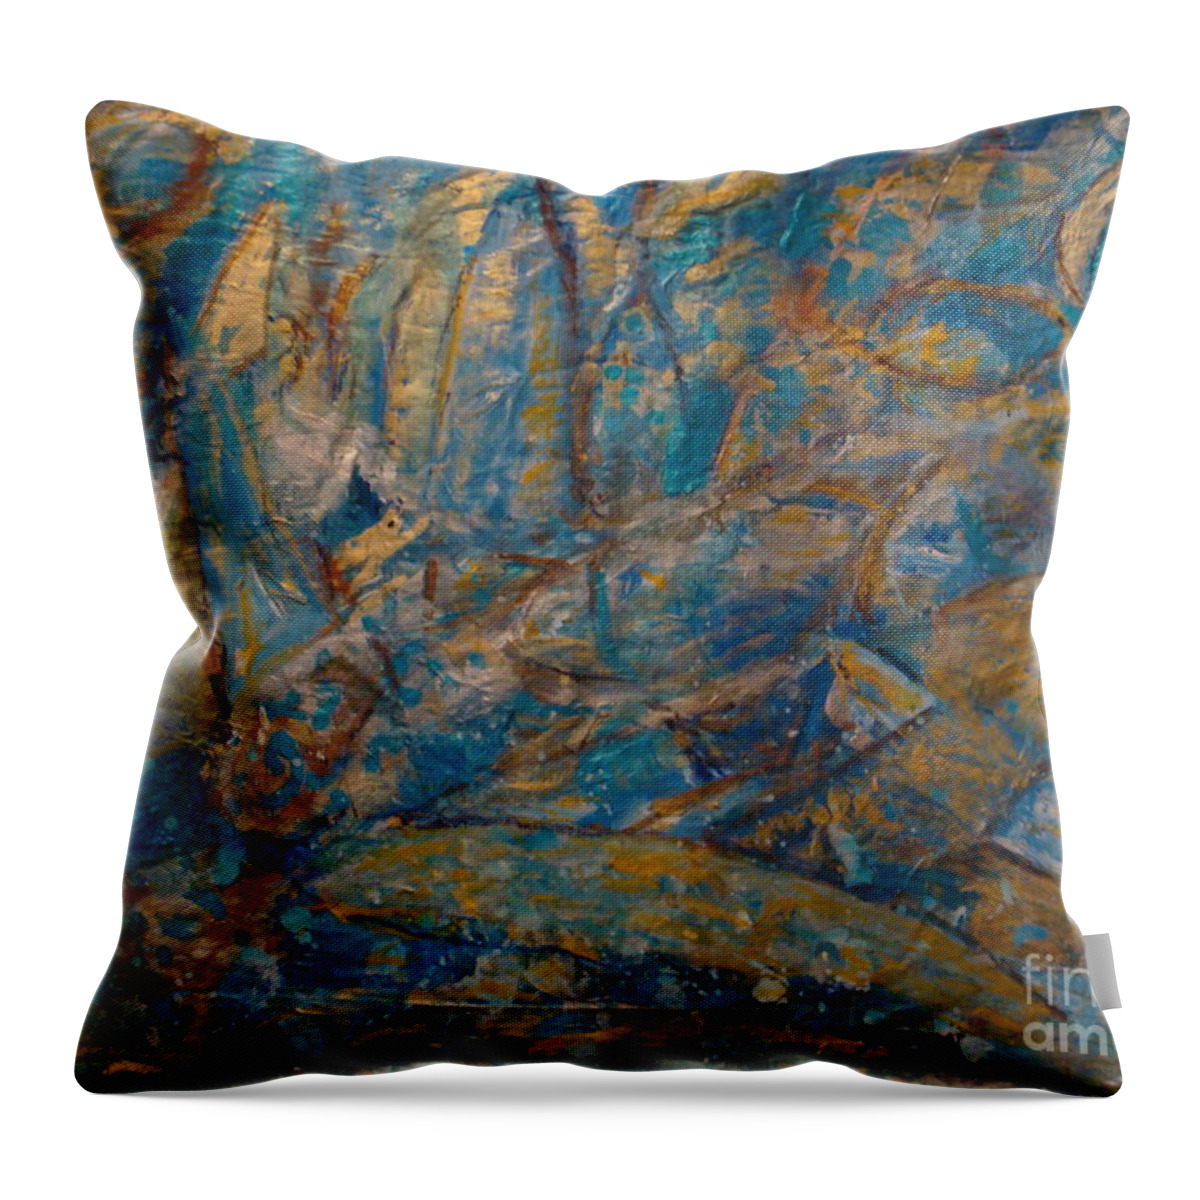 Sea Scape Throw Pillow featuring the painting Twilight Sails by Fereshteh Stoecklein